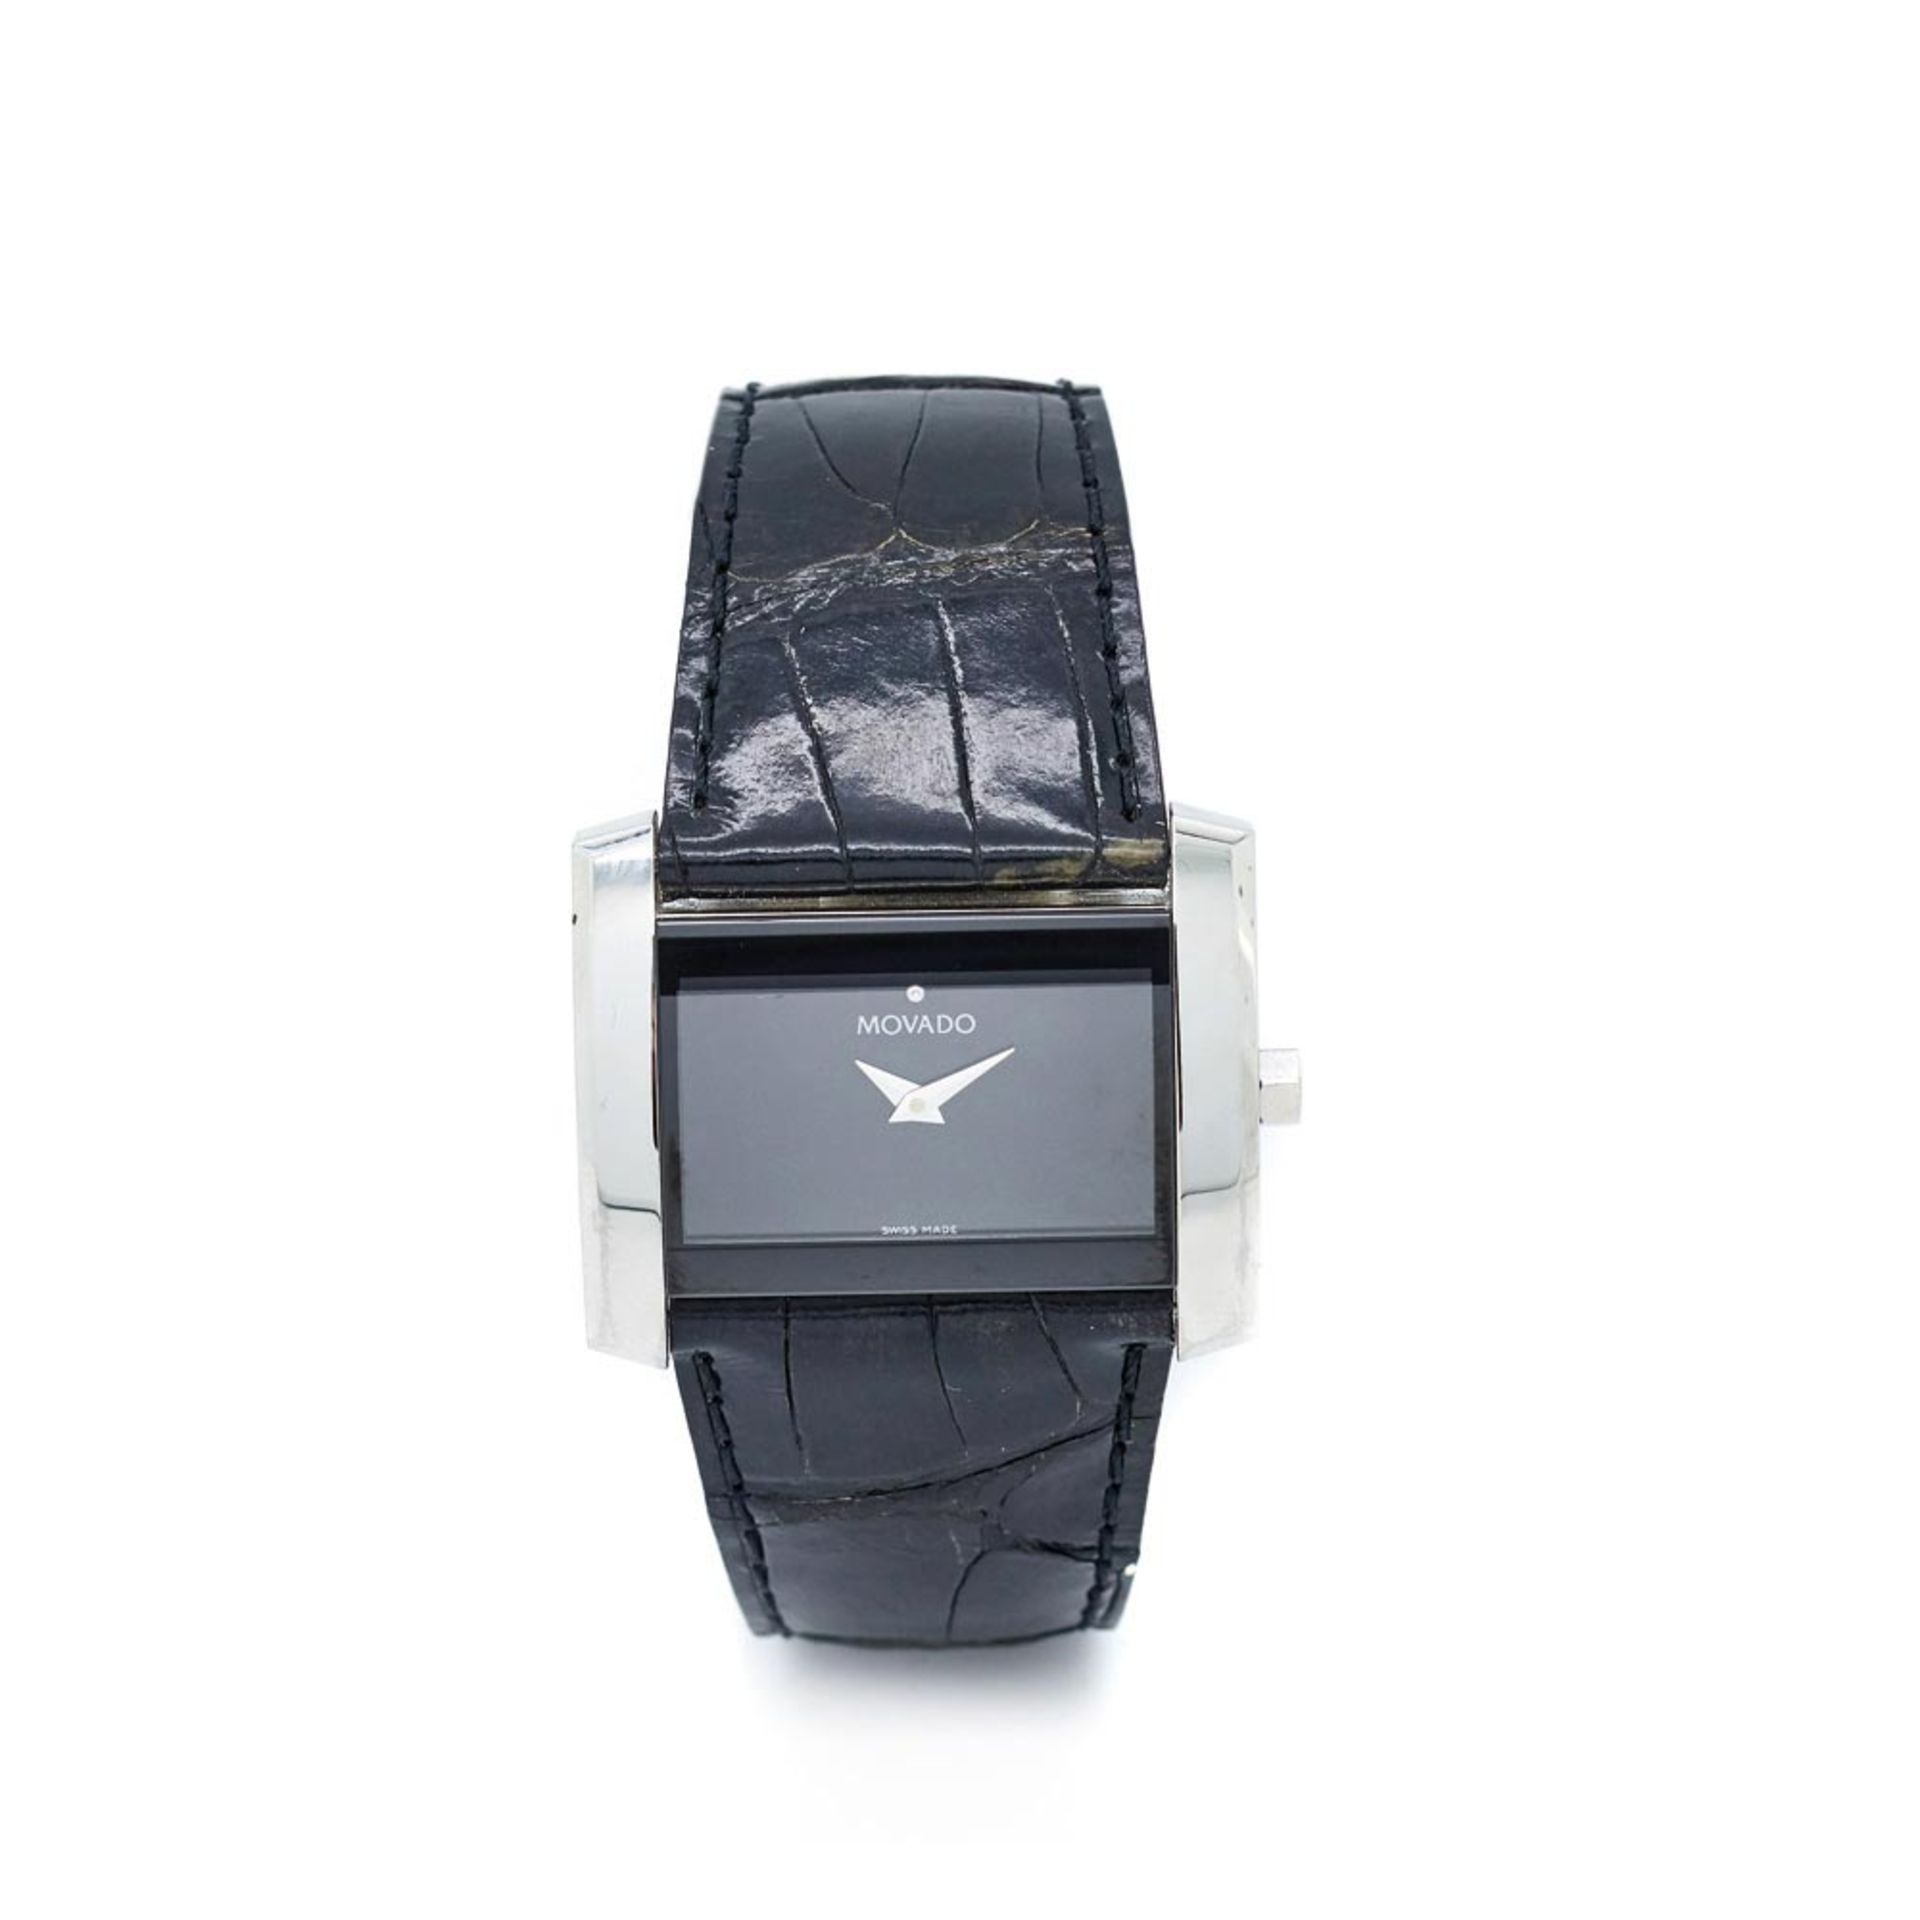 Movado steel and leather wristwatch